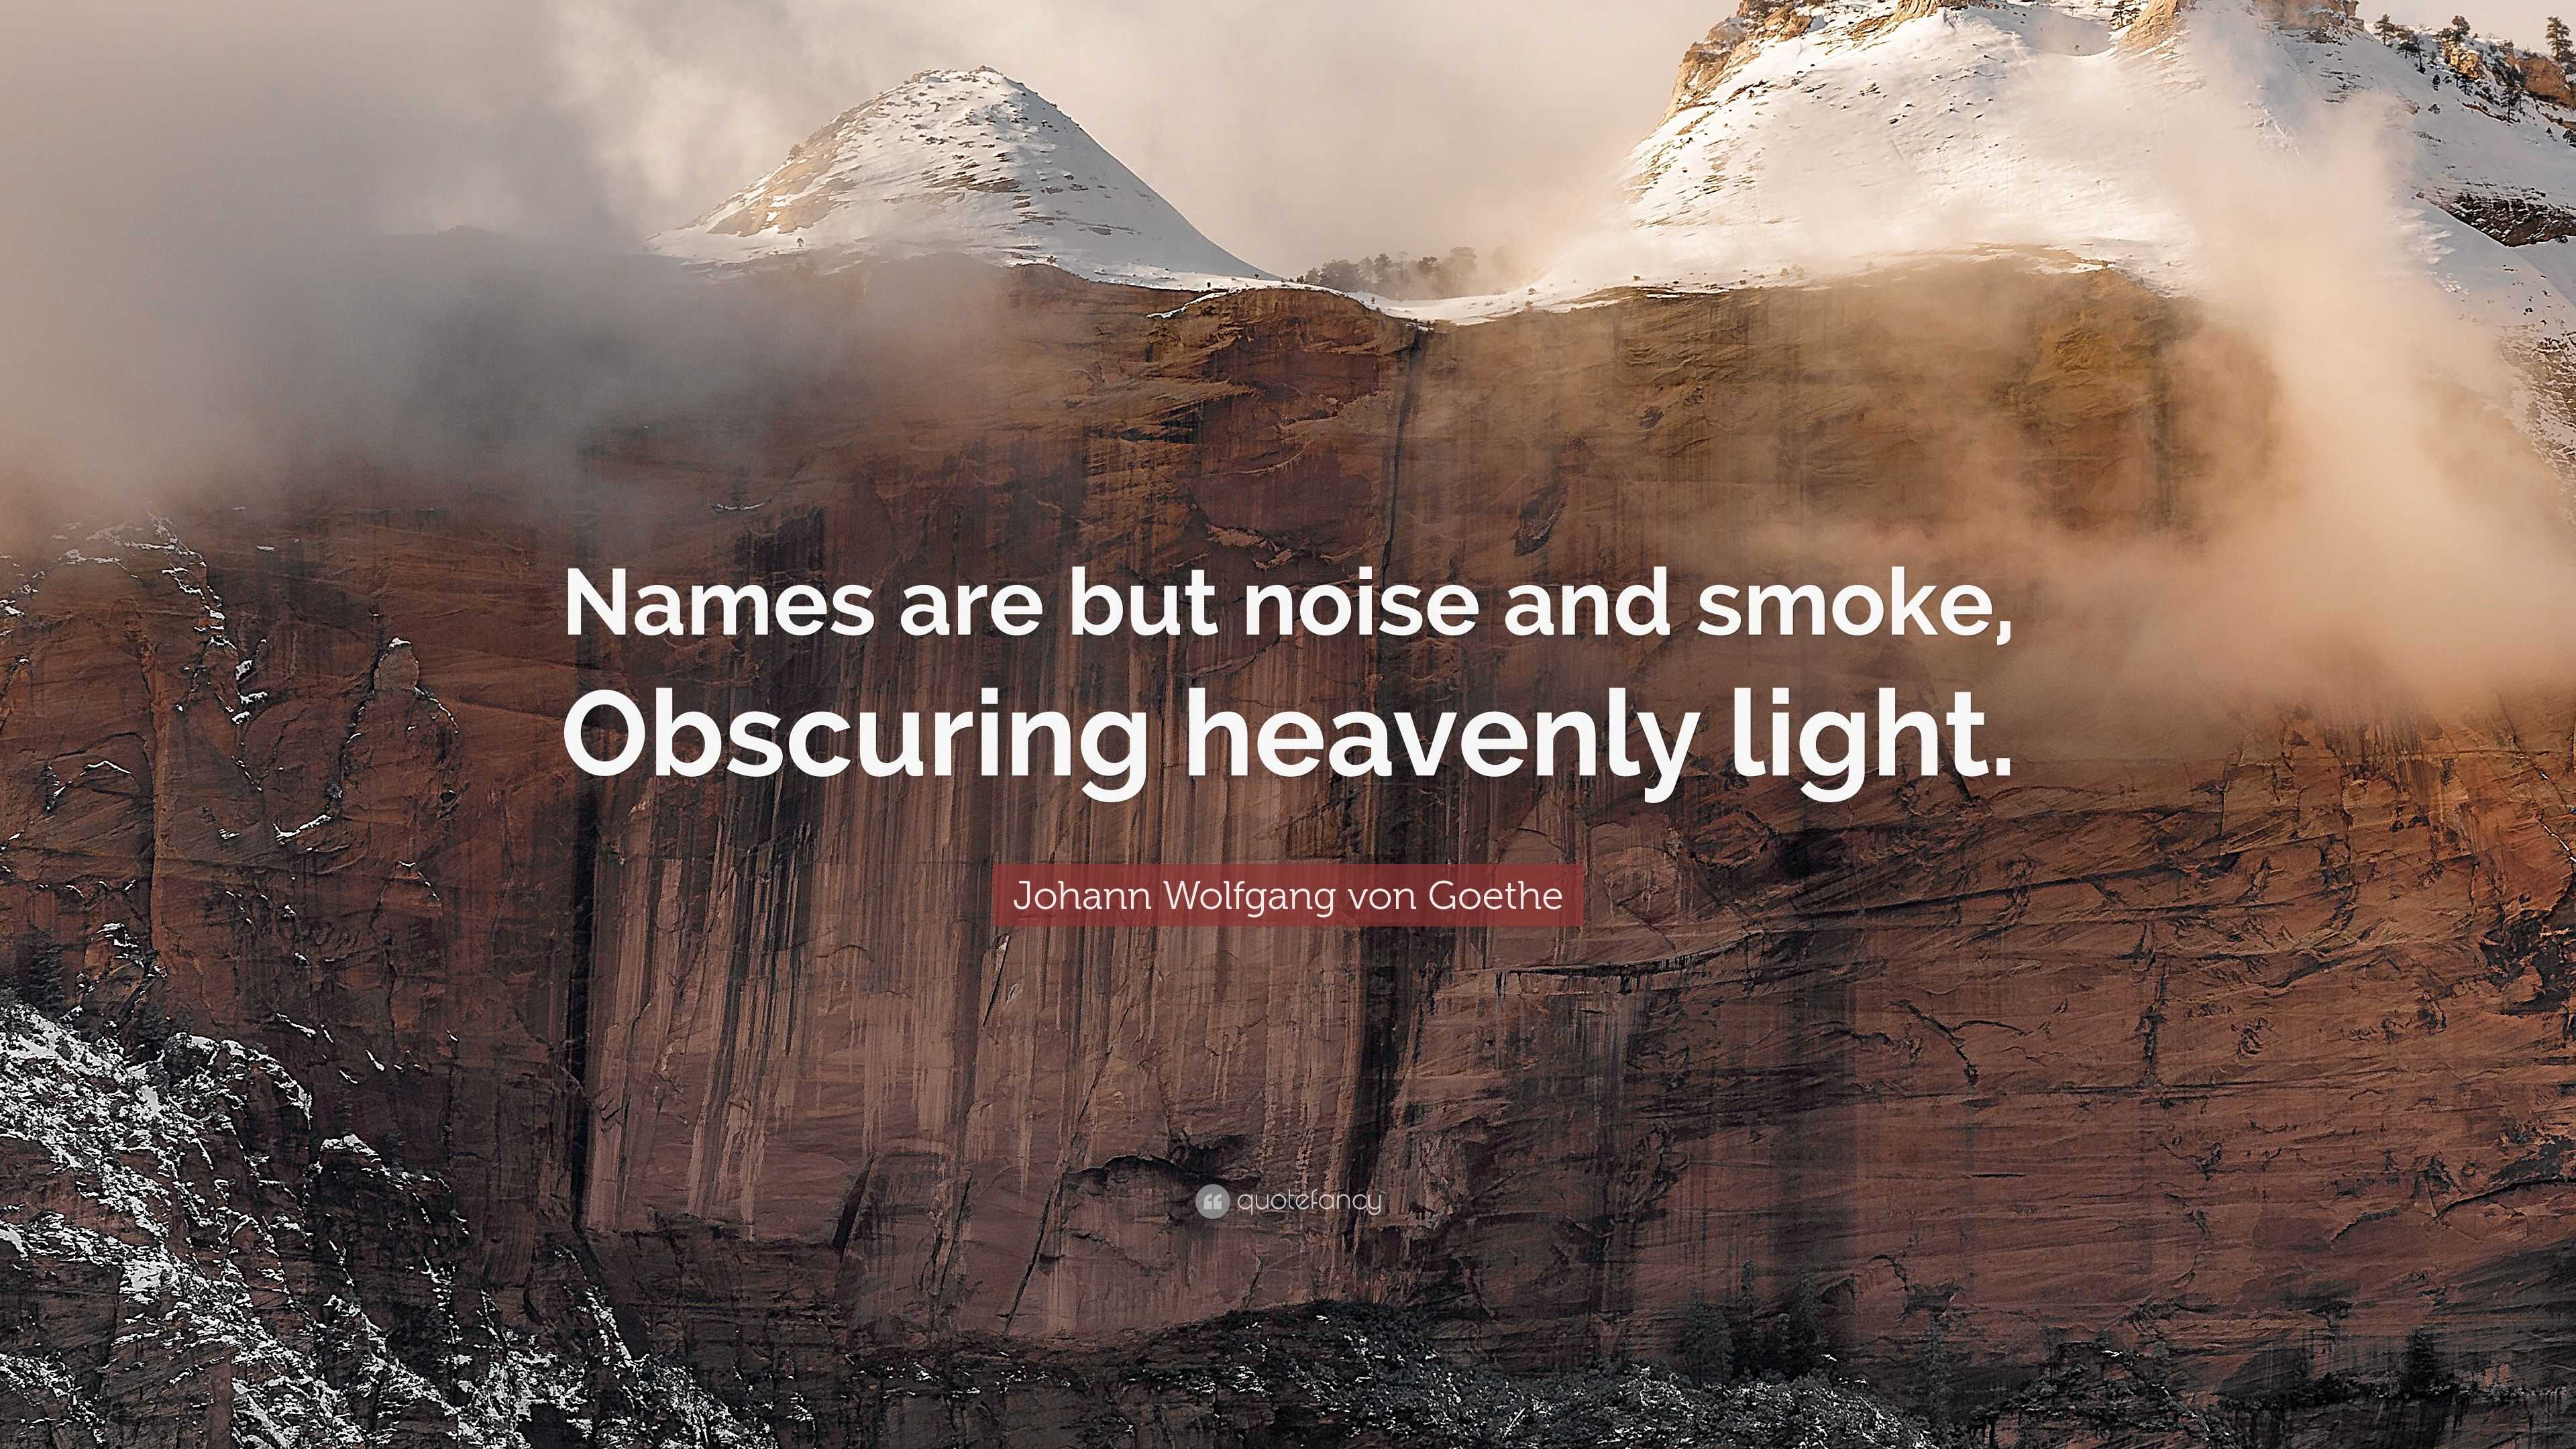 Johann Wolfgang von Goethe Quote: “Names are but noise and smoke